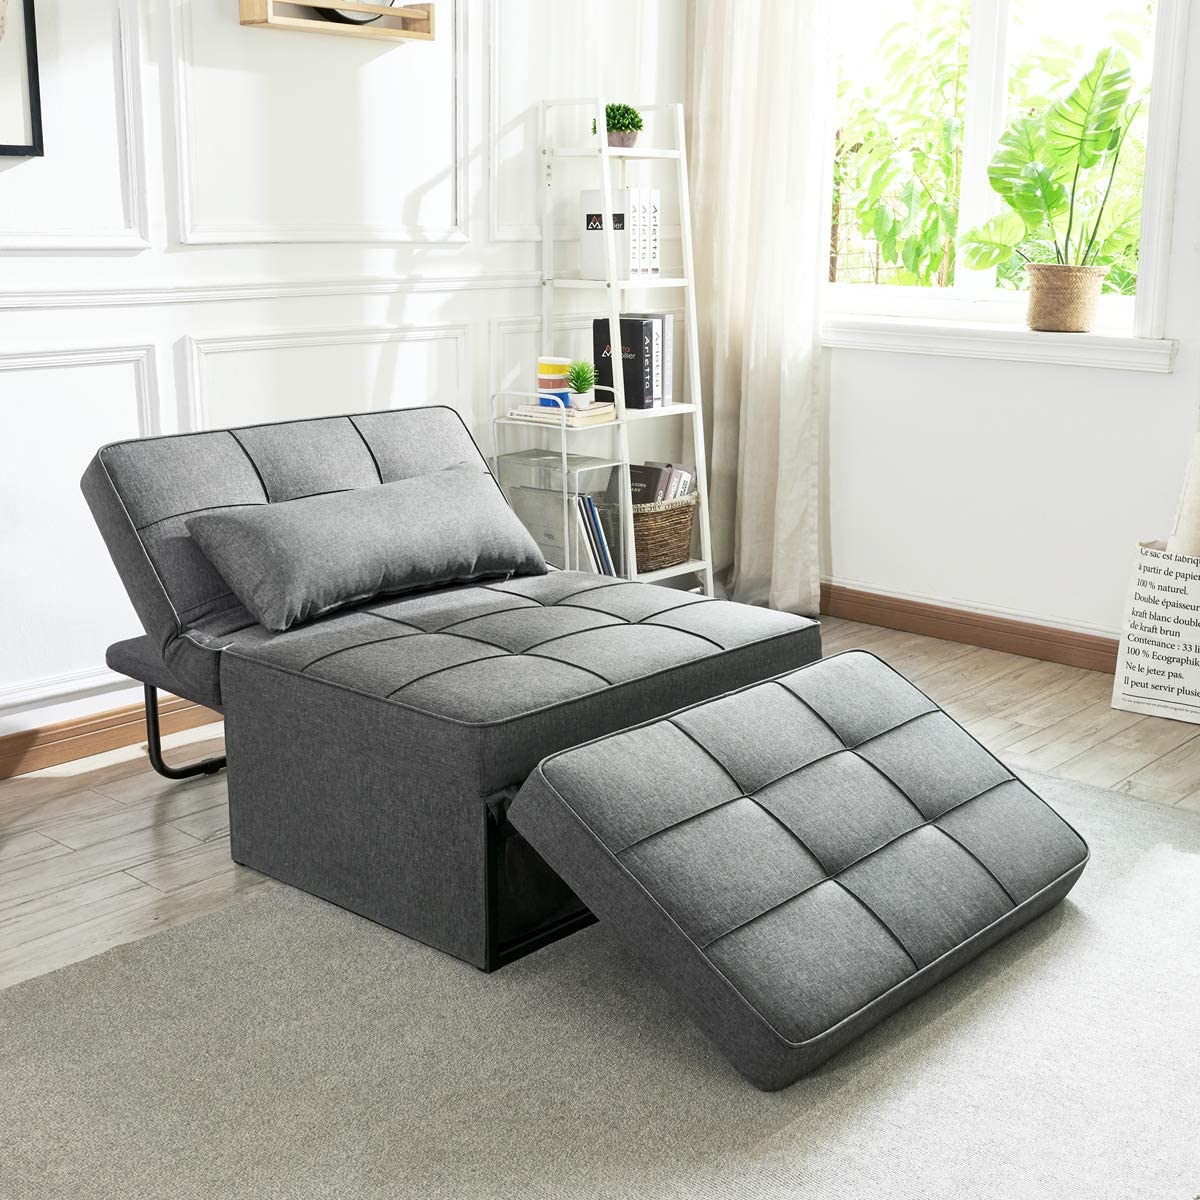 Evicka Sofa Bed, Convertible Chair 4 in 1 Multi-Function Folding Ottoman Modern Breathable Linen Guest Bed with Adjustable Sleeper